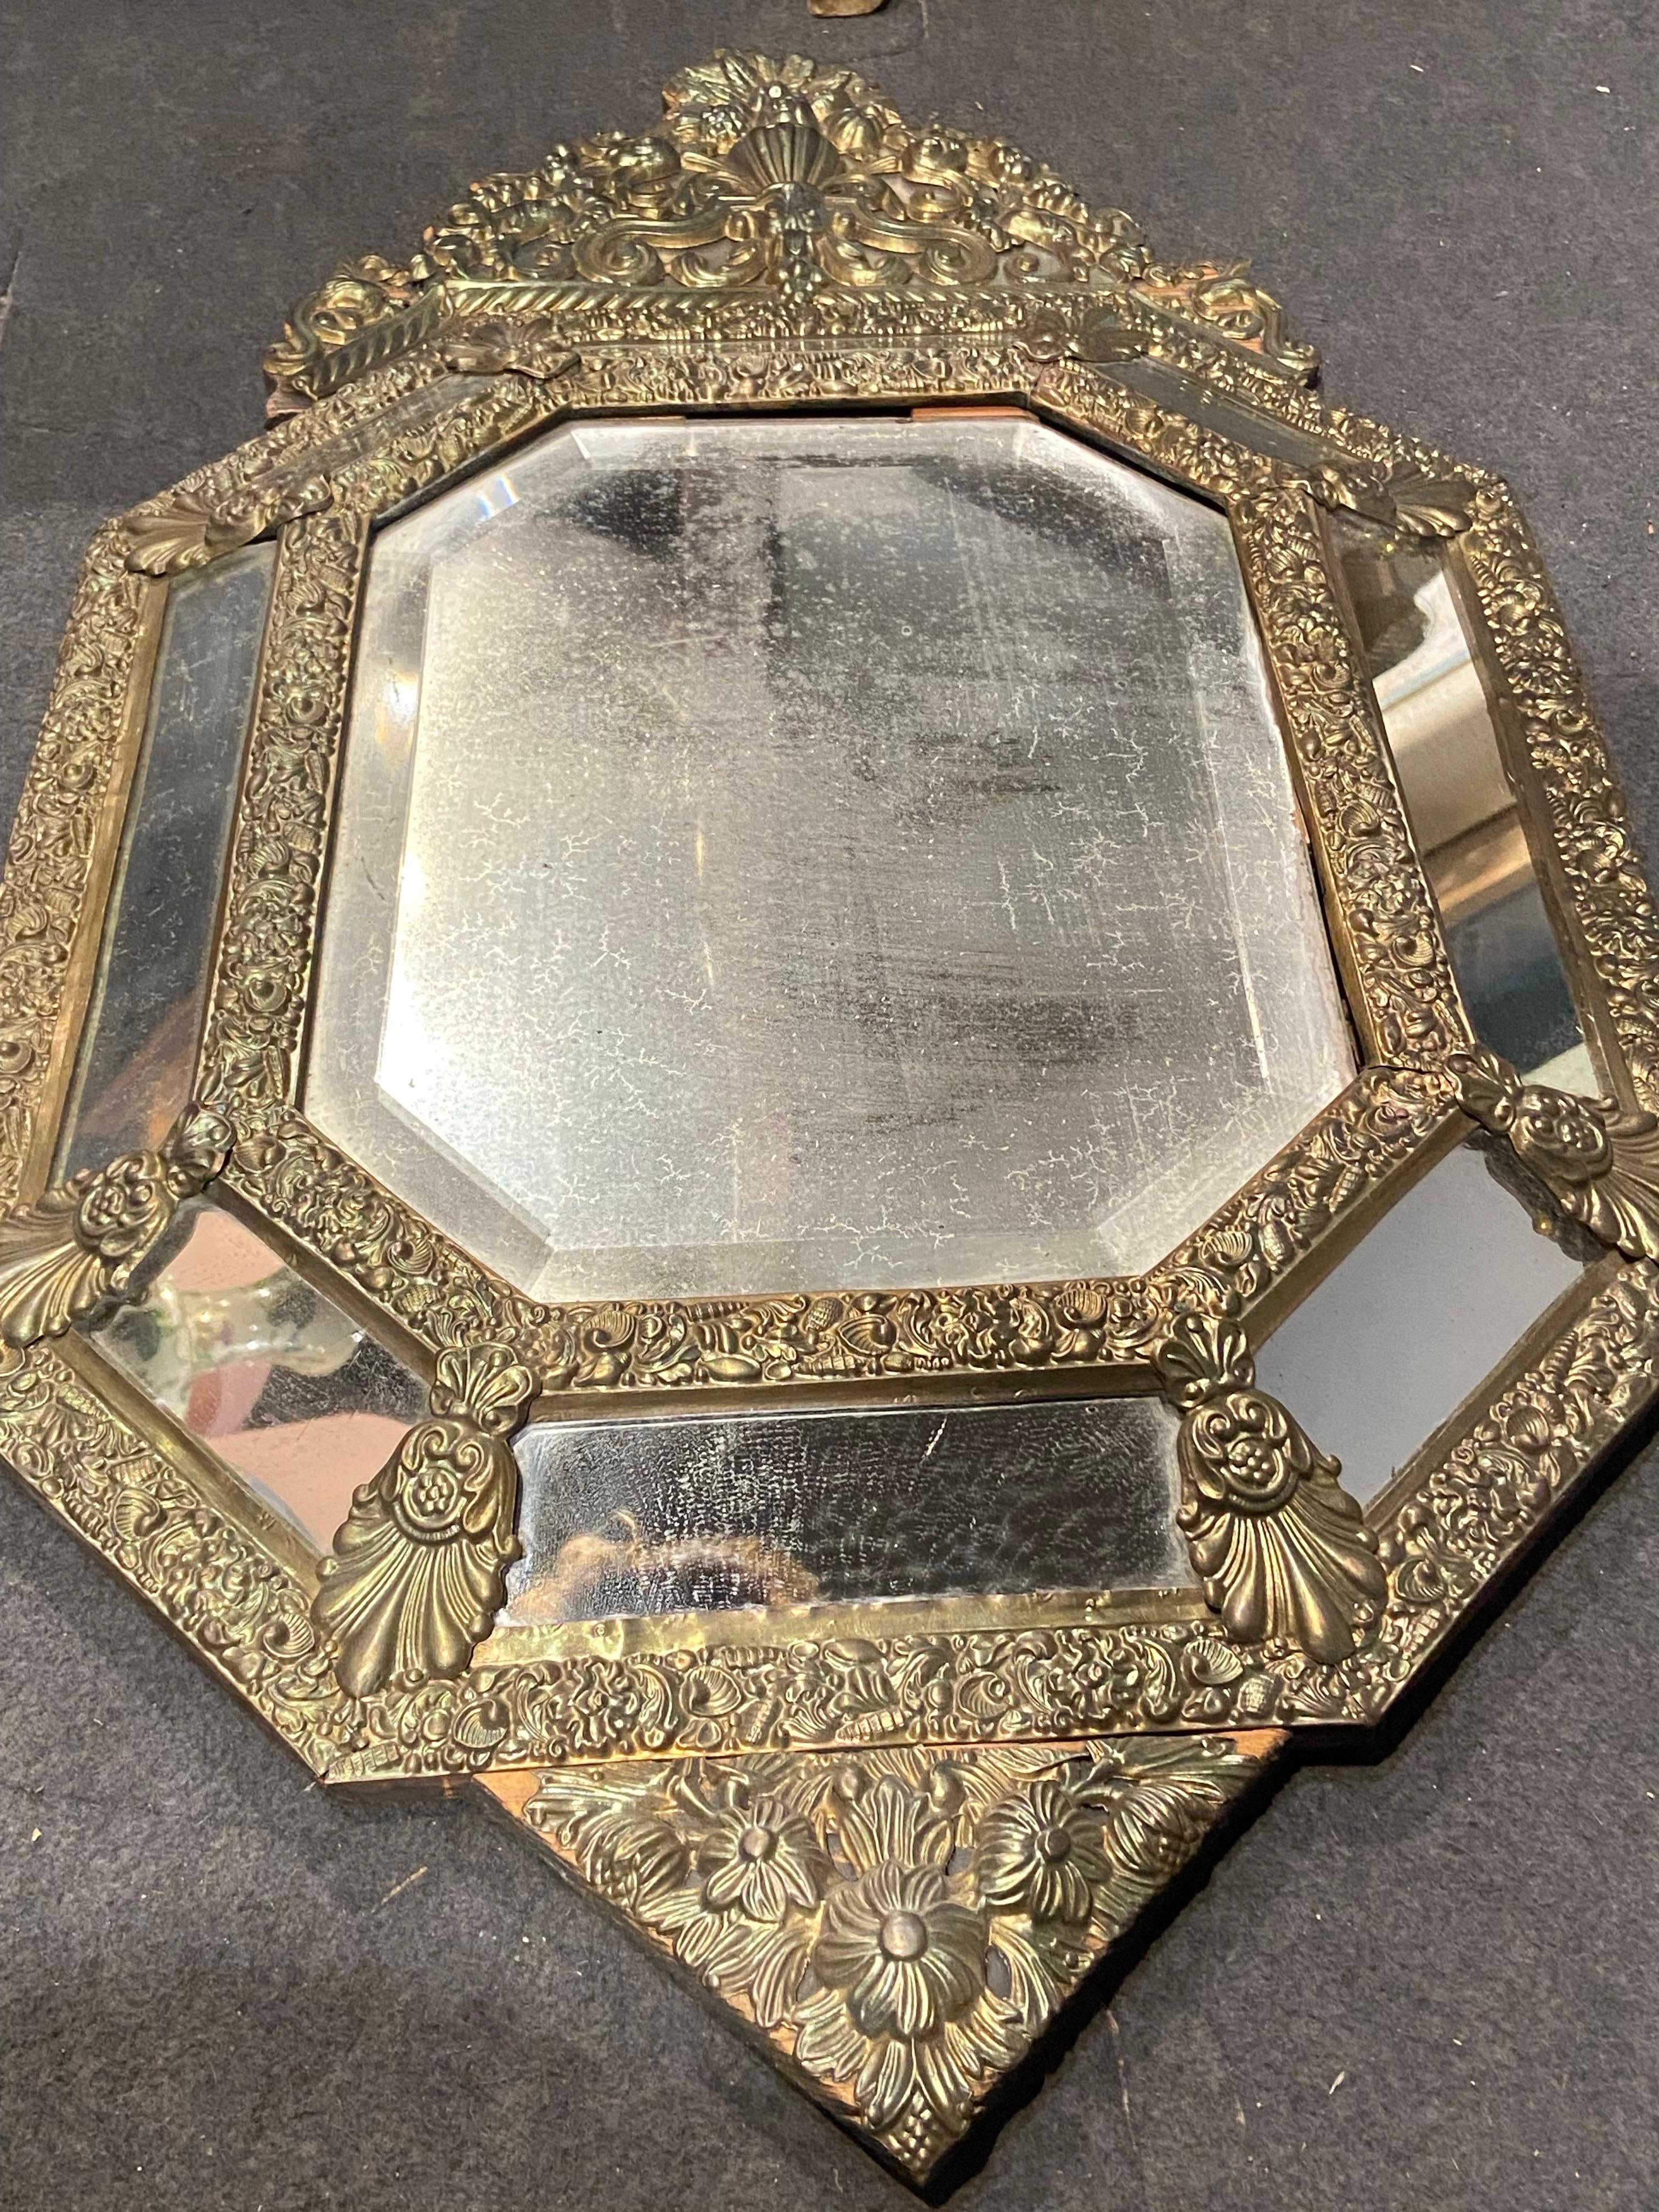 This beautiful mirror frame is made from repoussed brass with all original parts placed over dark oak wood base. The mirror is dated late 19th century and is in a good condition but the glass itself is faded. There were no restorations so